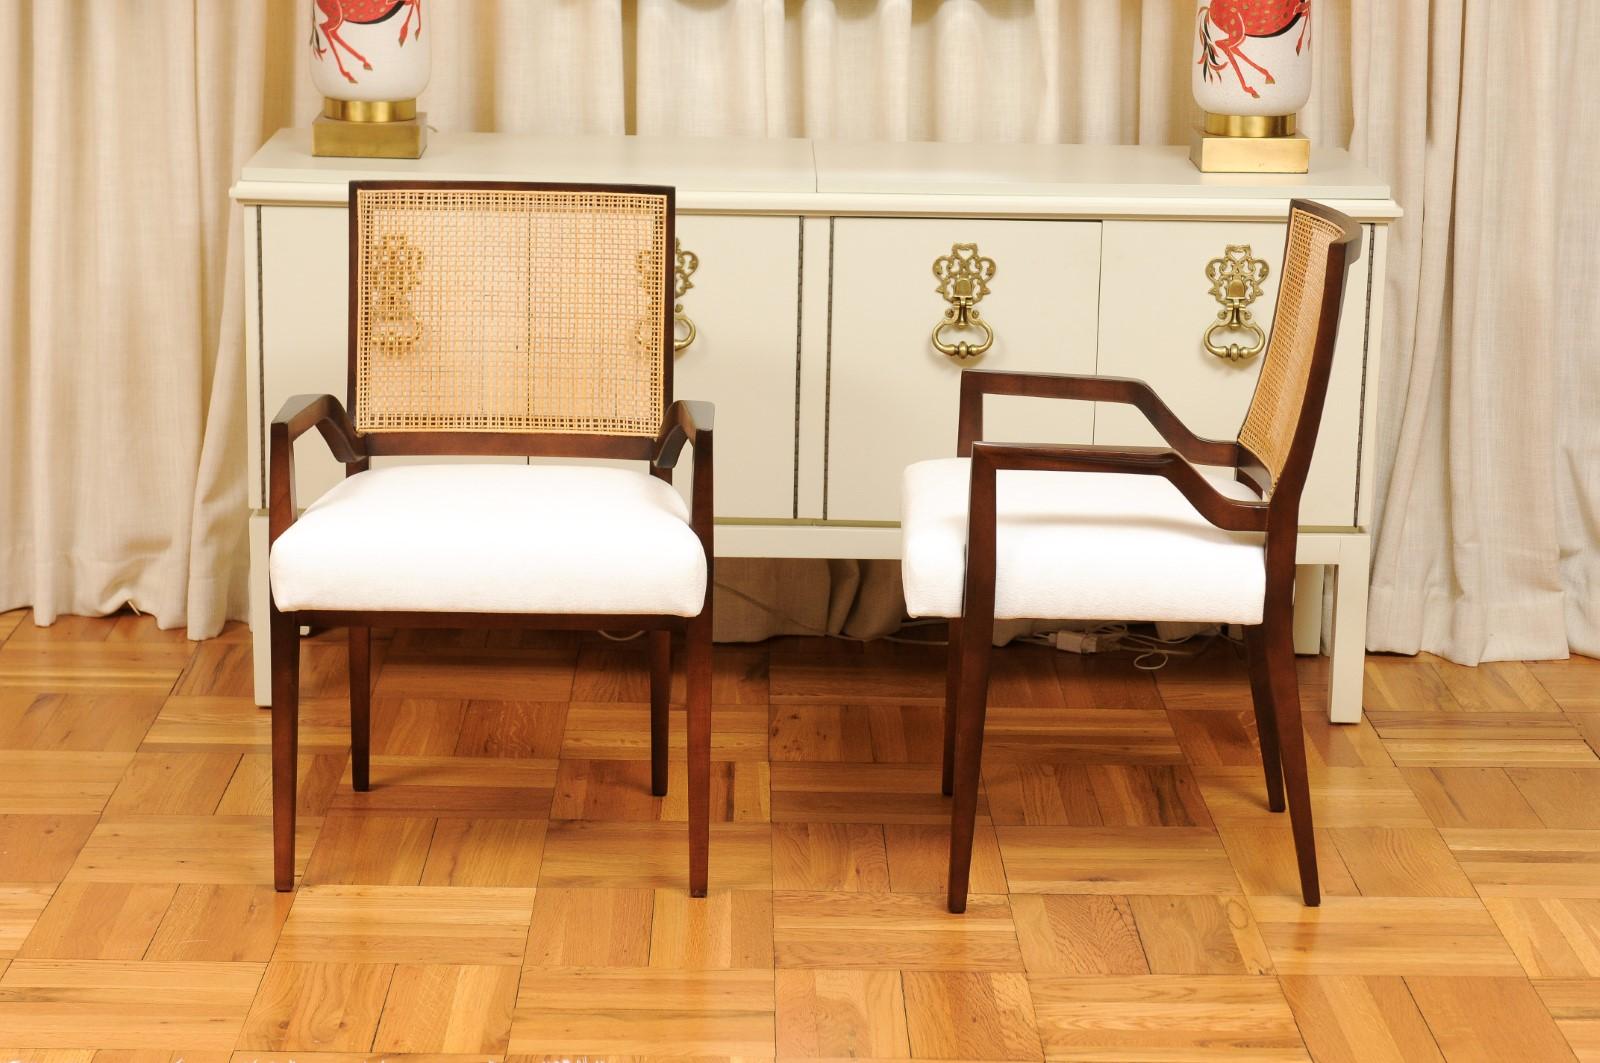 All Arms, Unrivaled Set of 8 Cane Dining Chairs by Michael Taylor, circa 1960 For Sale 2